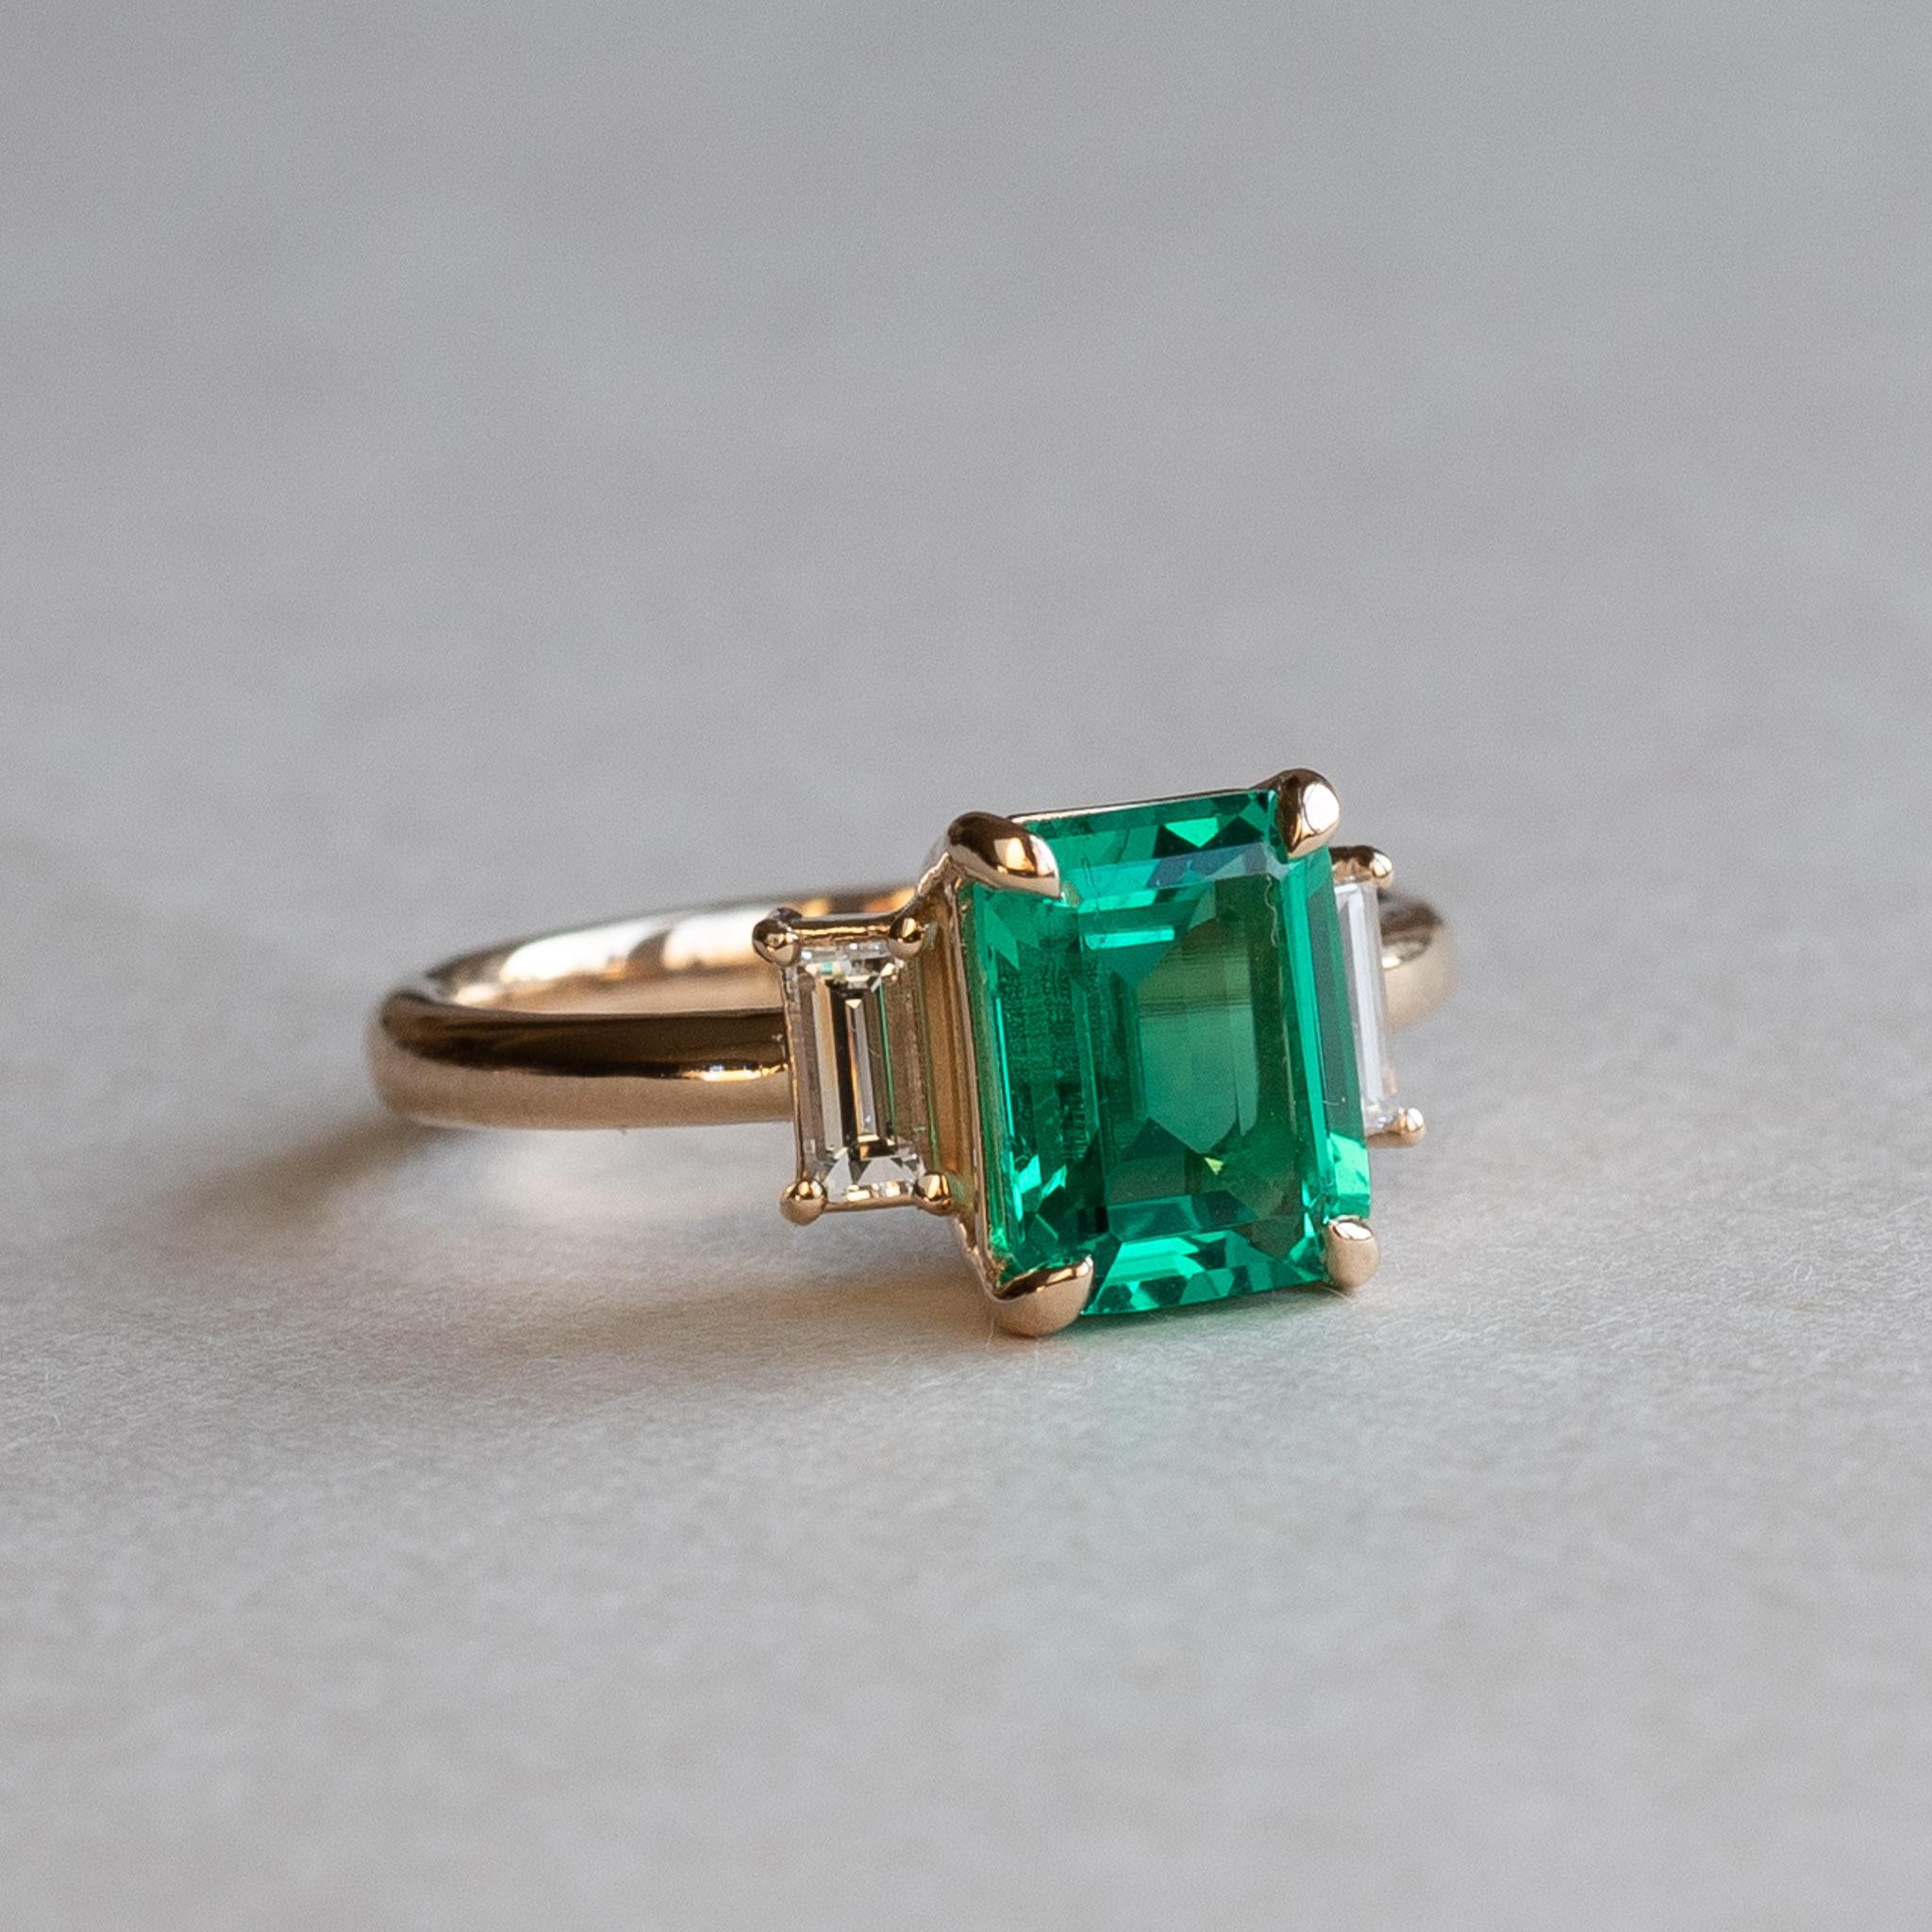 Emerald adorned with baguette diamonds
Stone: Lab Grown Emerald
Cut: Emerald/Step
Three stone ring
Stone Size: 8 x6 mm
Baguette Diamonds: Two 4.5 x 2 mm
Diamond Clarity: SI
Diamond Color: GHI
Diamond weight: 0.12 carat each
Total Diamond Weight: